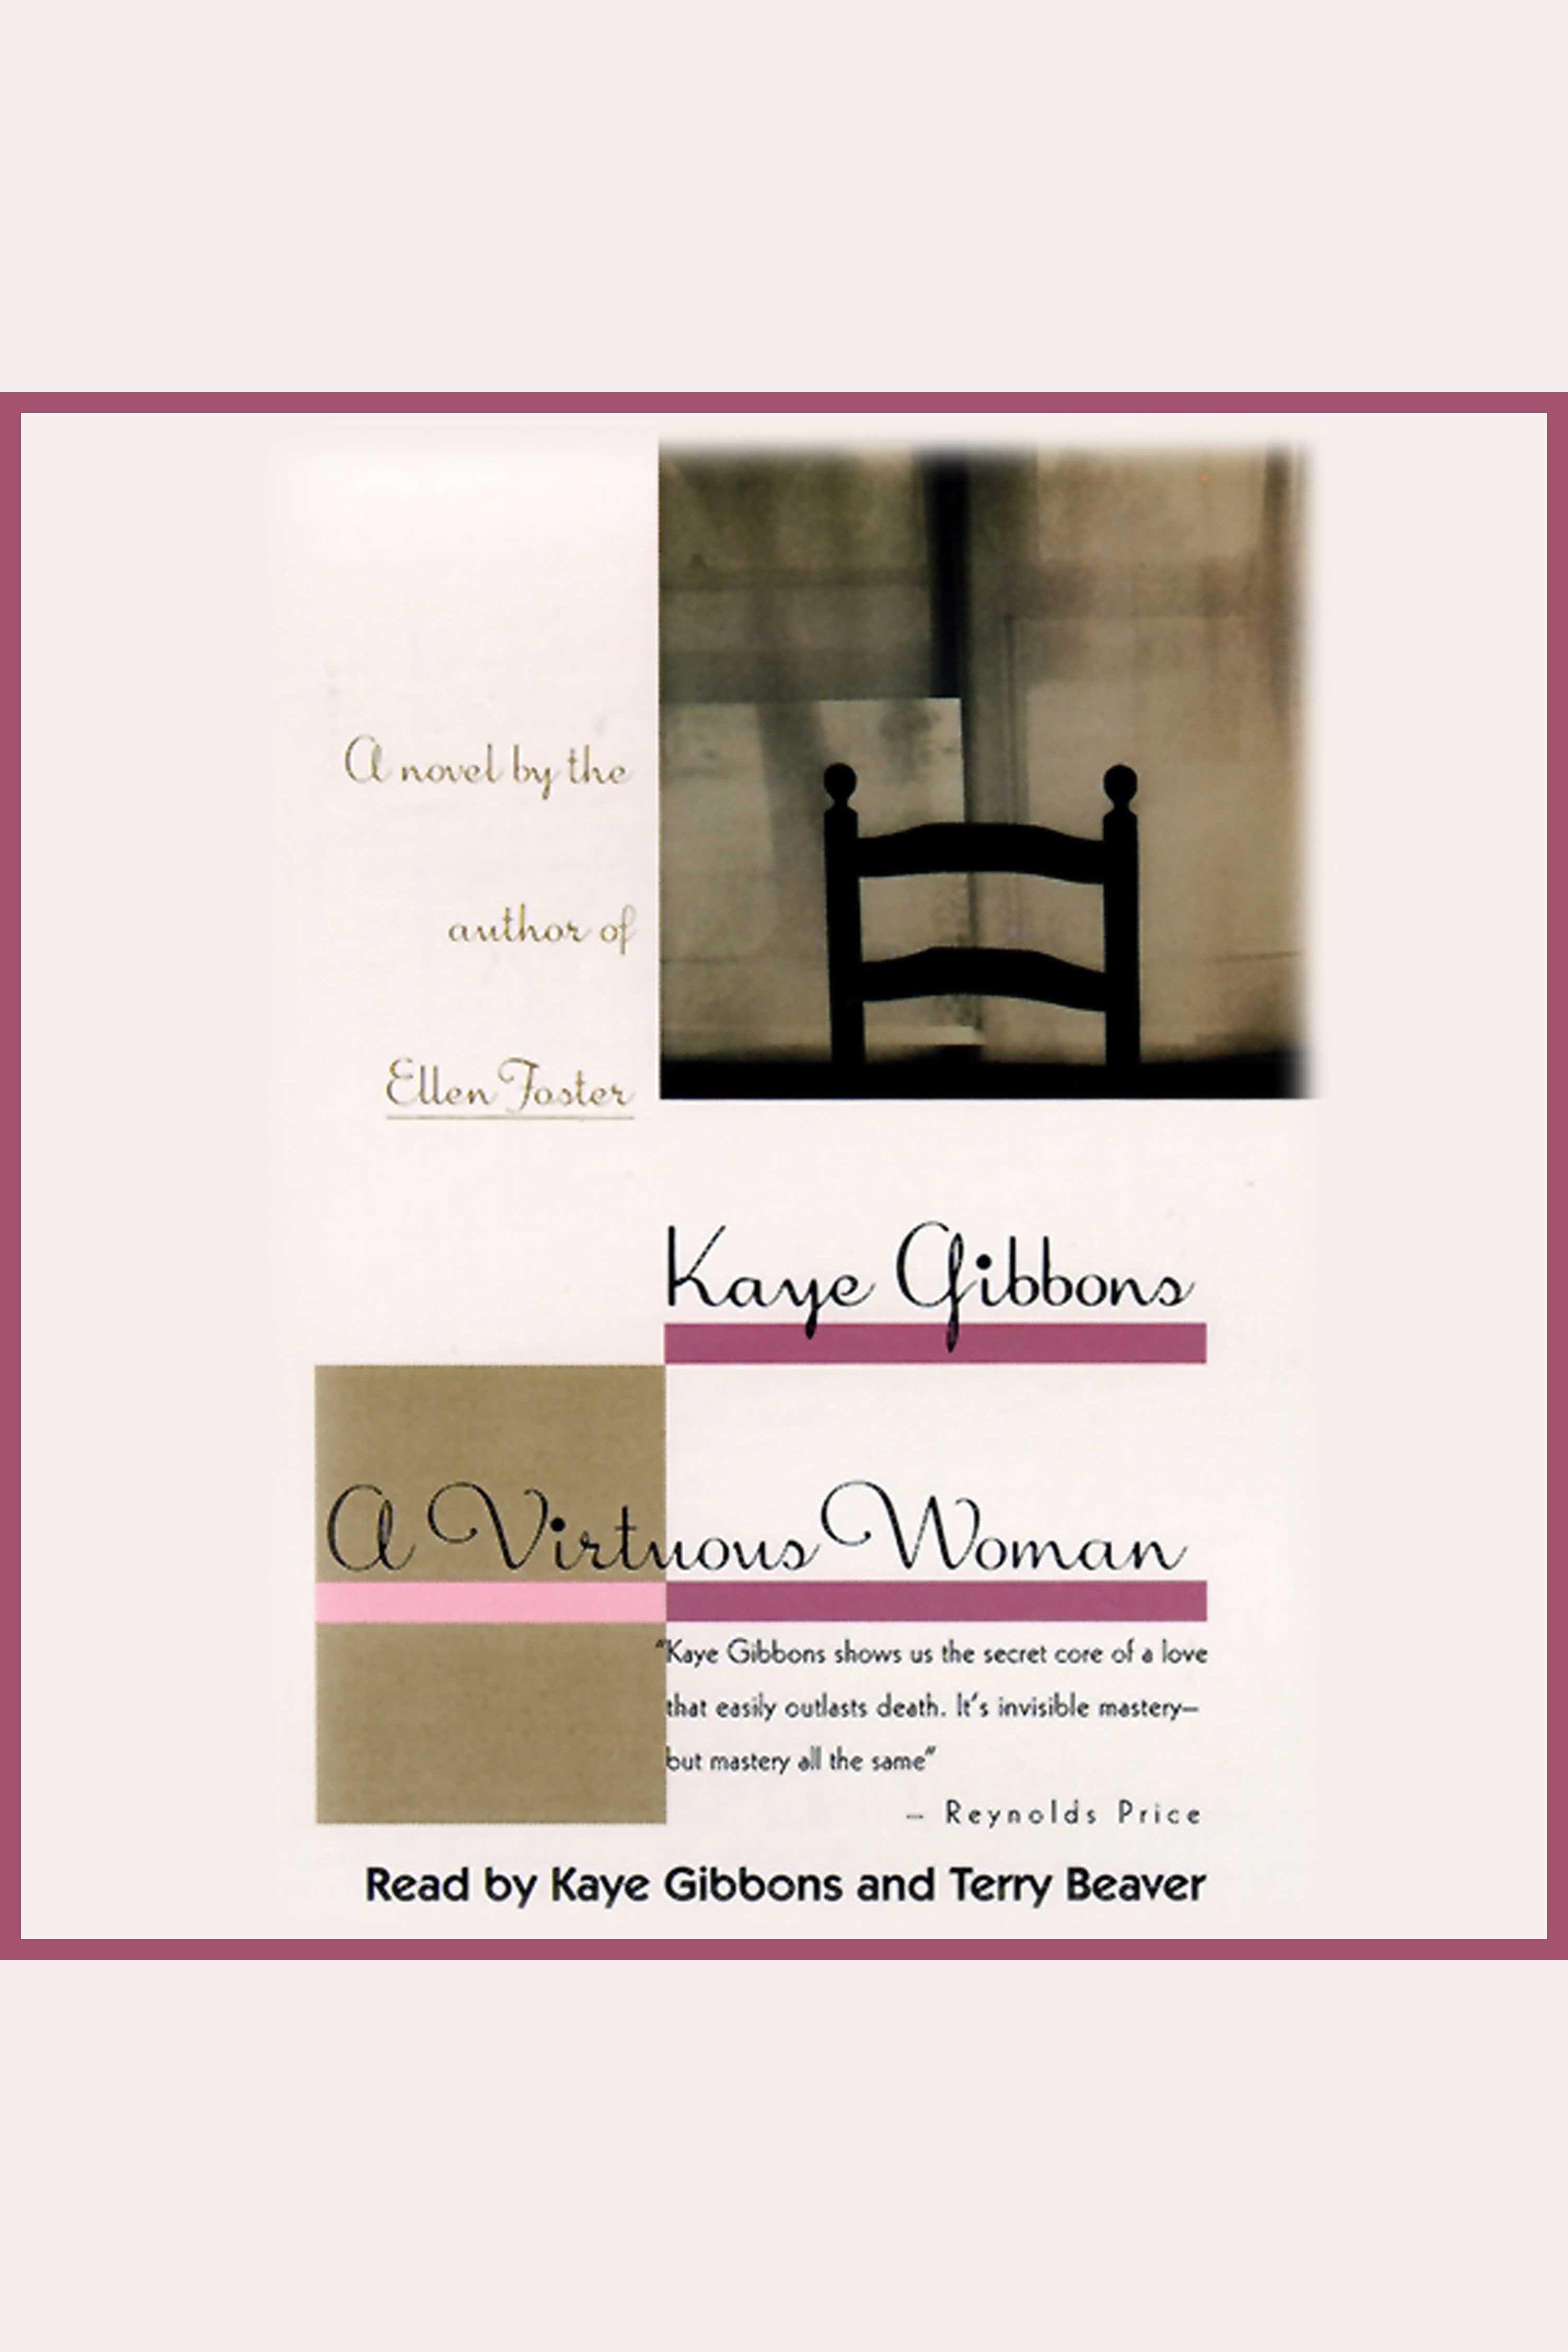 A Virtuous Woman cover image